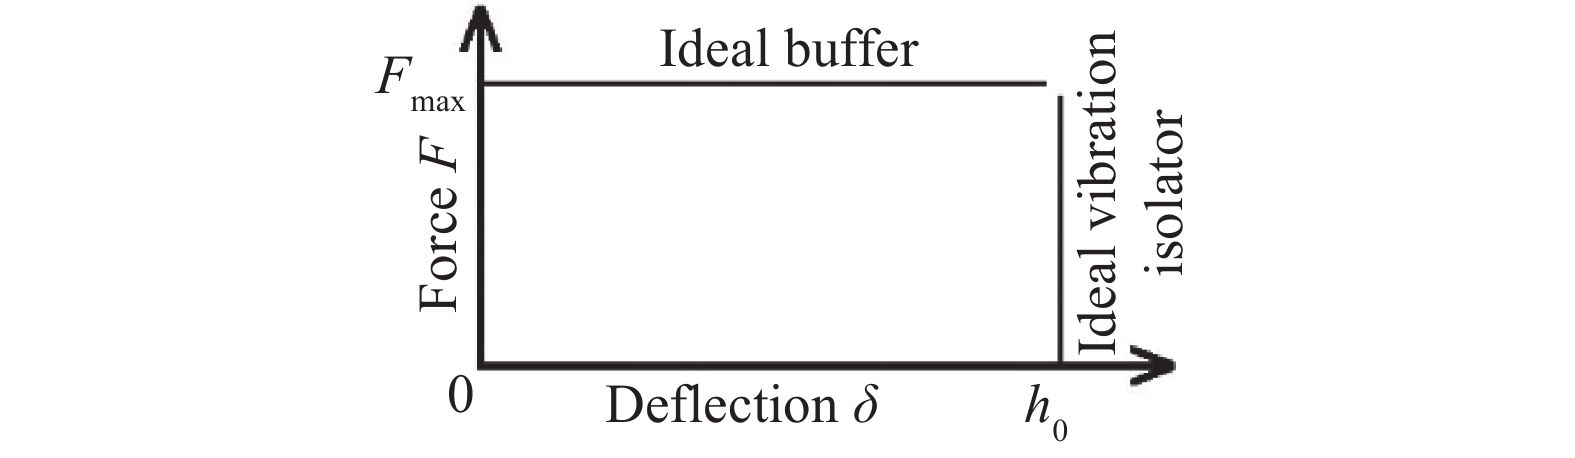 Model of ideal vibration isolator and ideal buffer